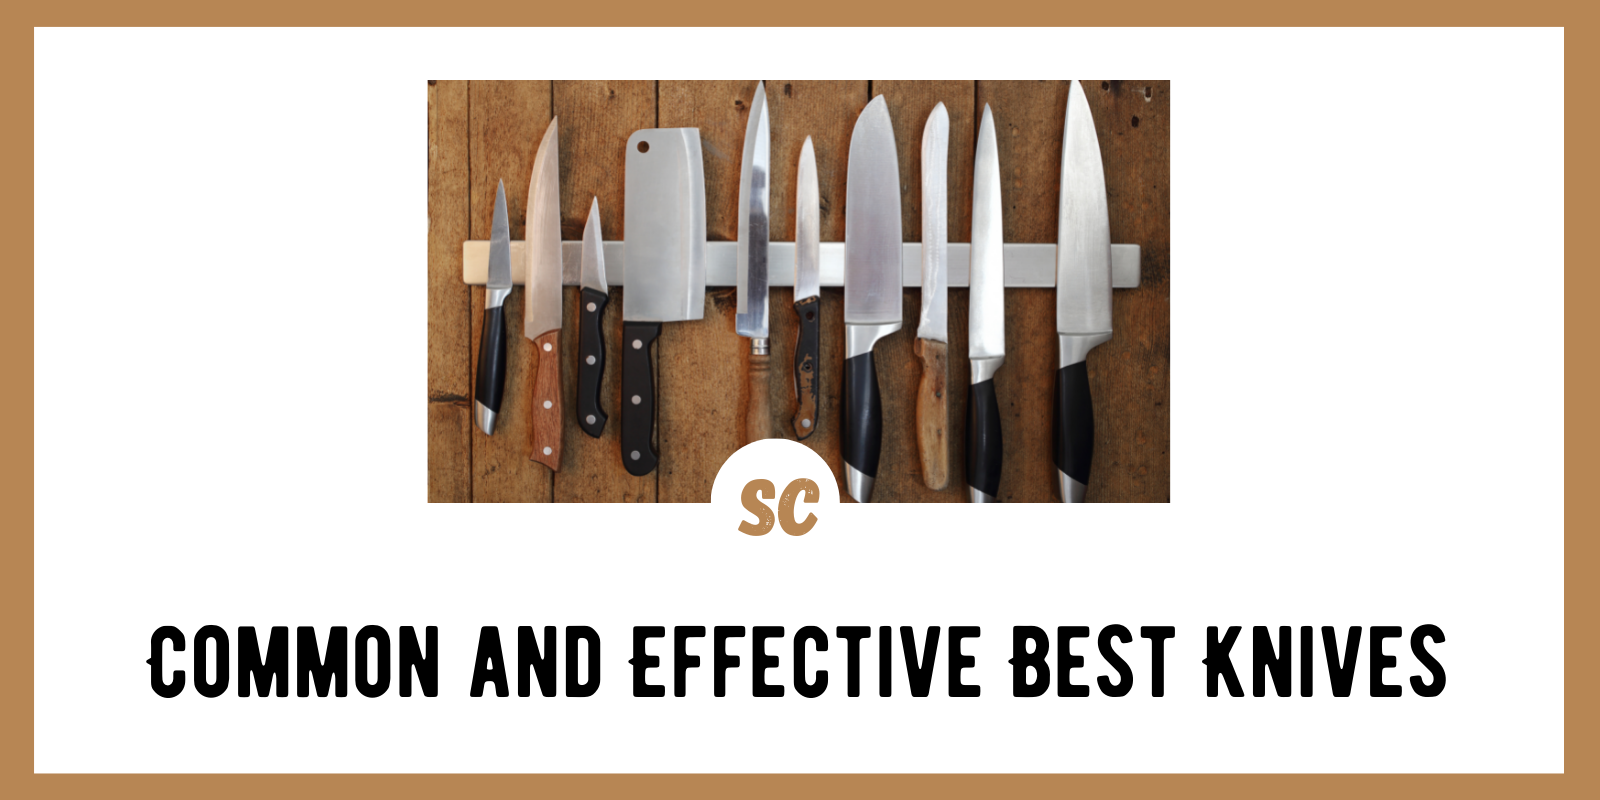 17 Types of Knife Blade Shapes and Uses